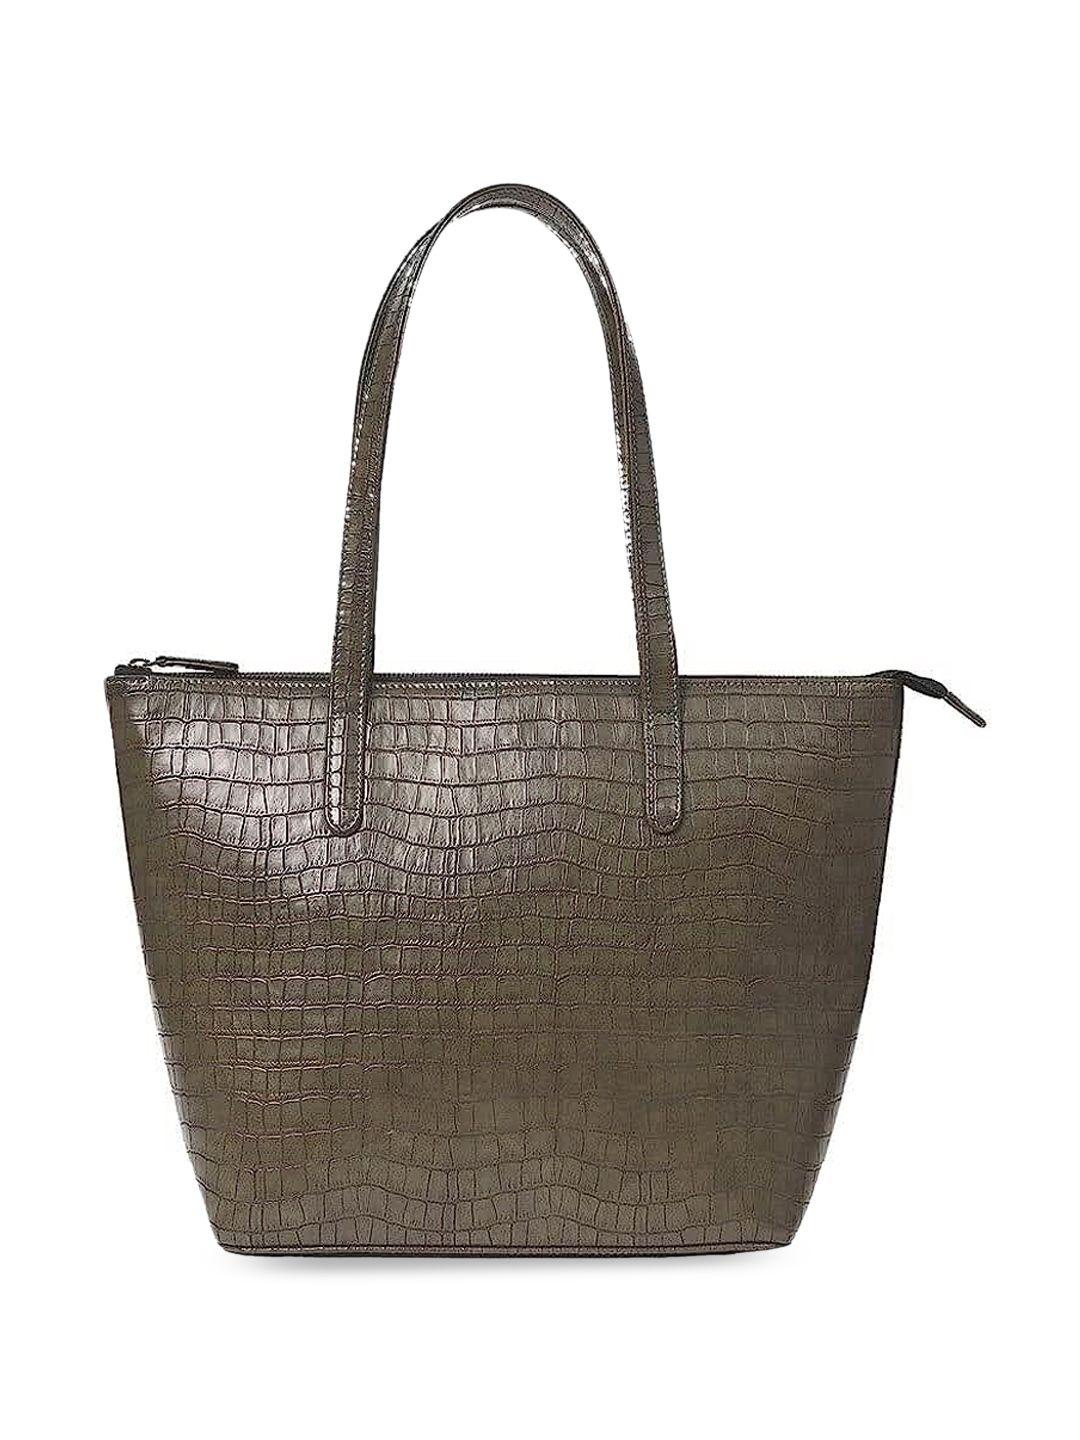 mast & harbour textured pu oversized structured handheld bag up to 12 inch